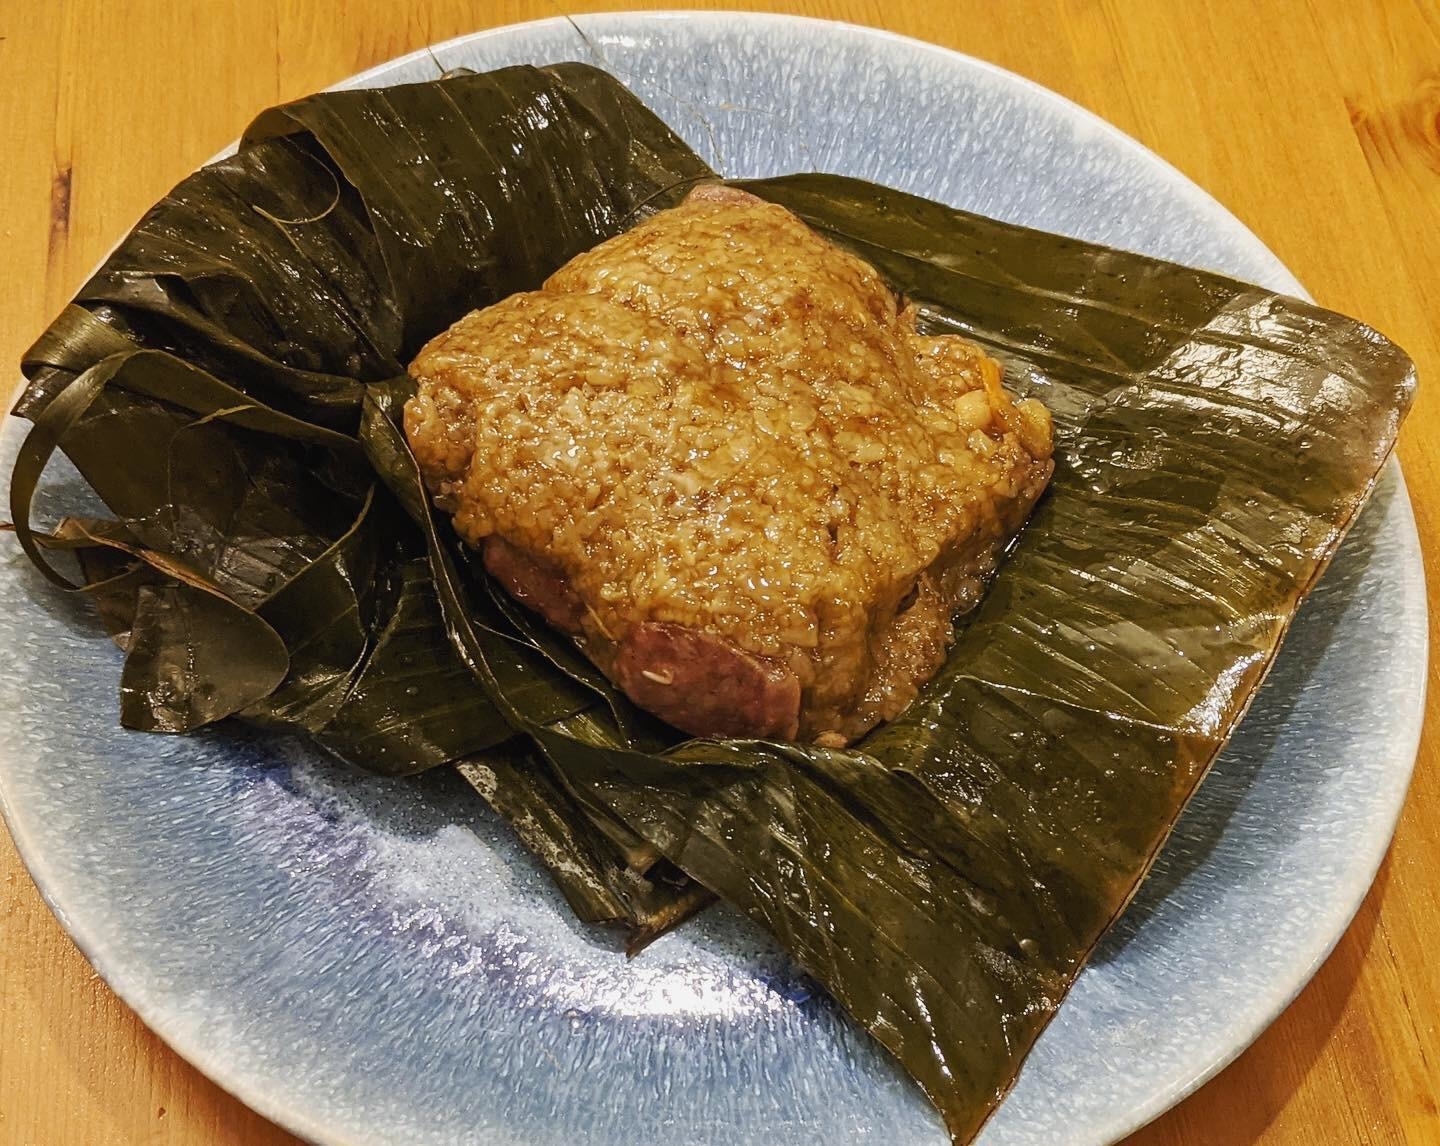 Rice dumpling wrapped in lotus leaves on a plate